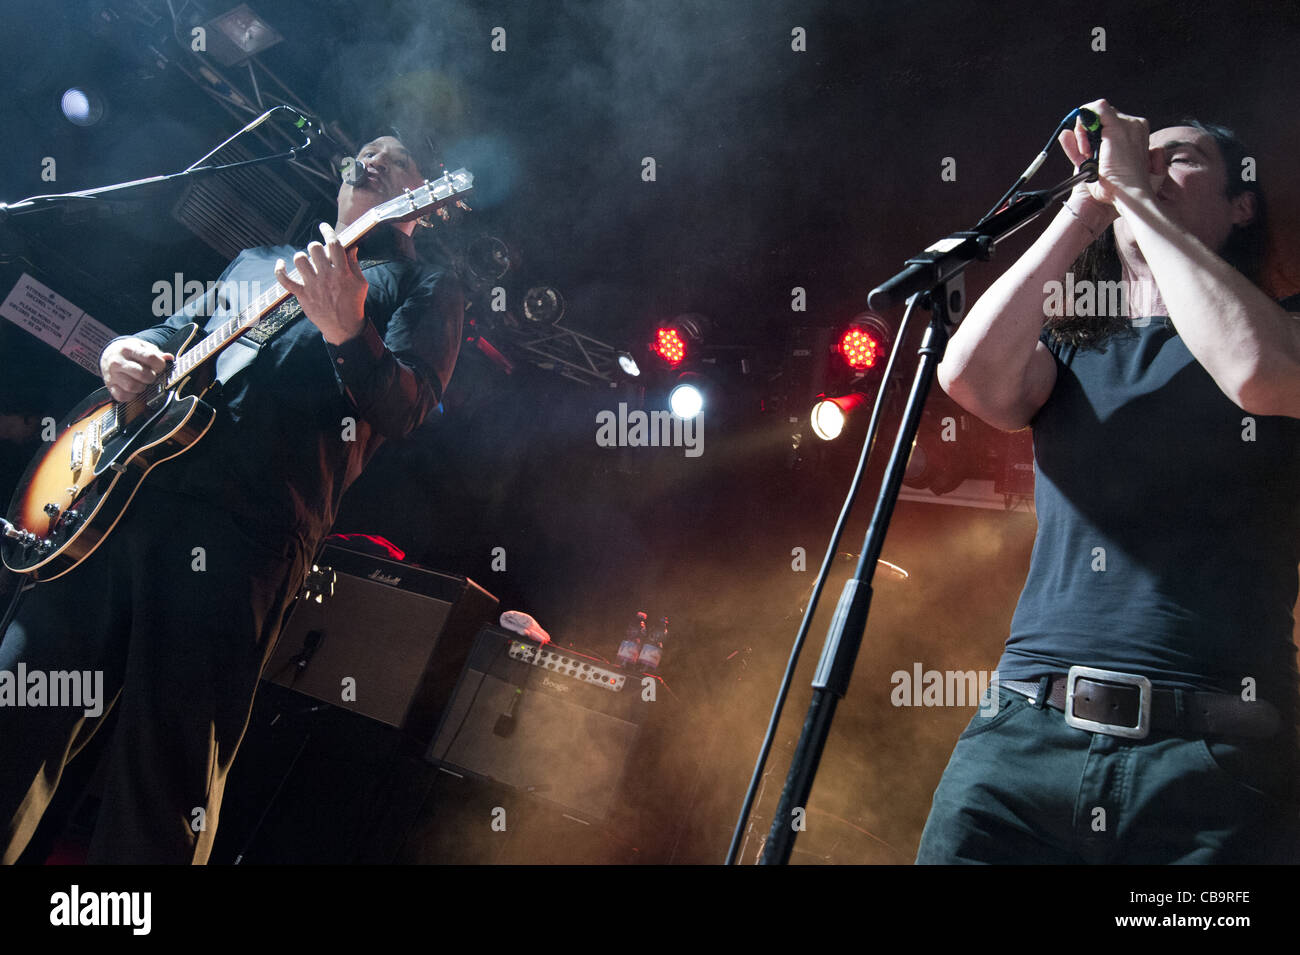 Greg Dulli and Manuel Agnelli of The Twilight Singers perform in Rome Stock Photo